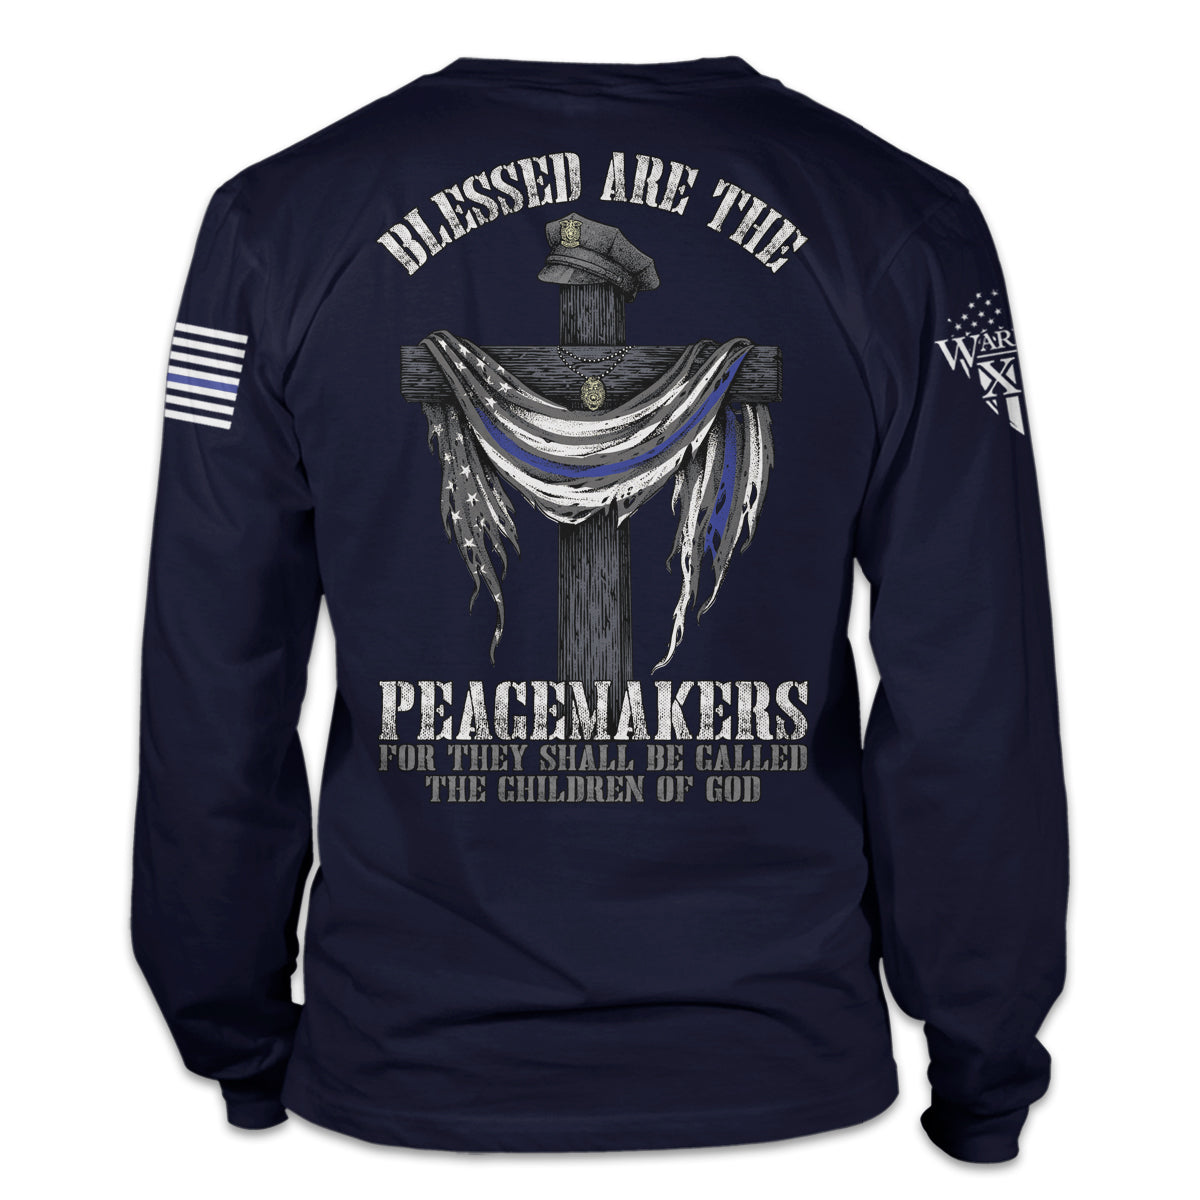 Blessed Are The Peacemakers navy blue long sleeve shirt with the cross, a police hat, and the back the blue flag printed on the back of the shirt.